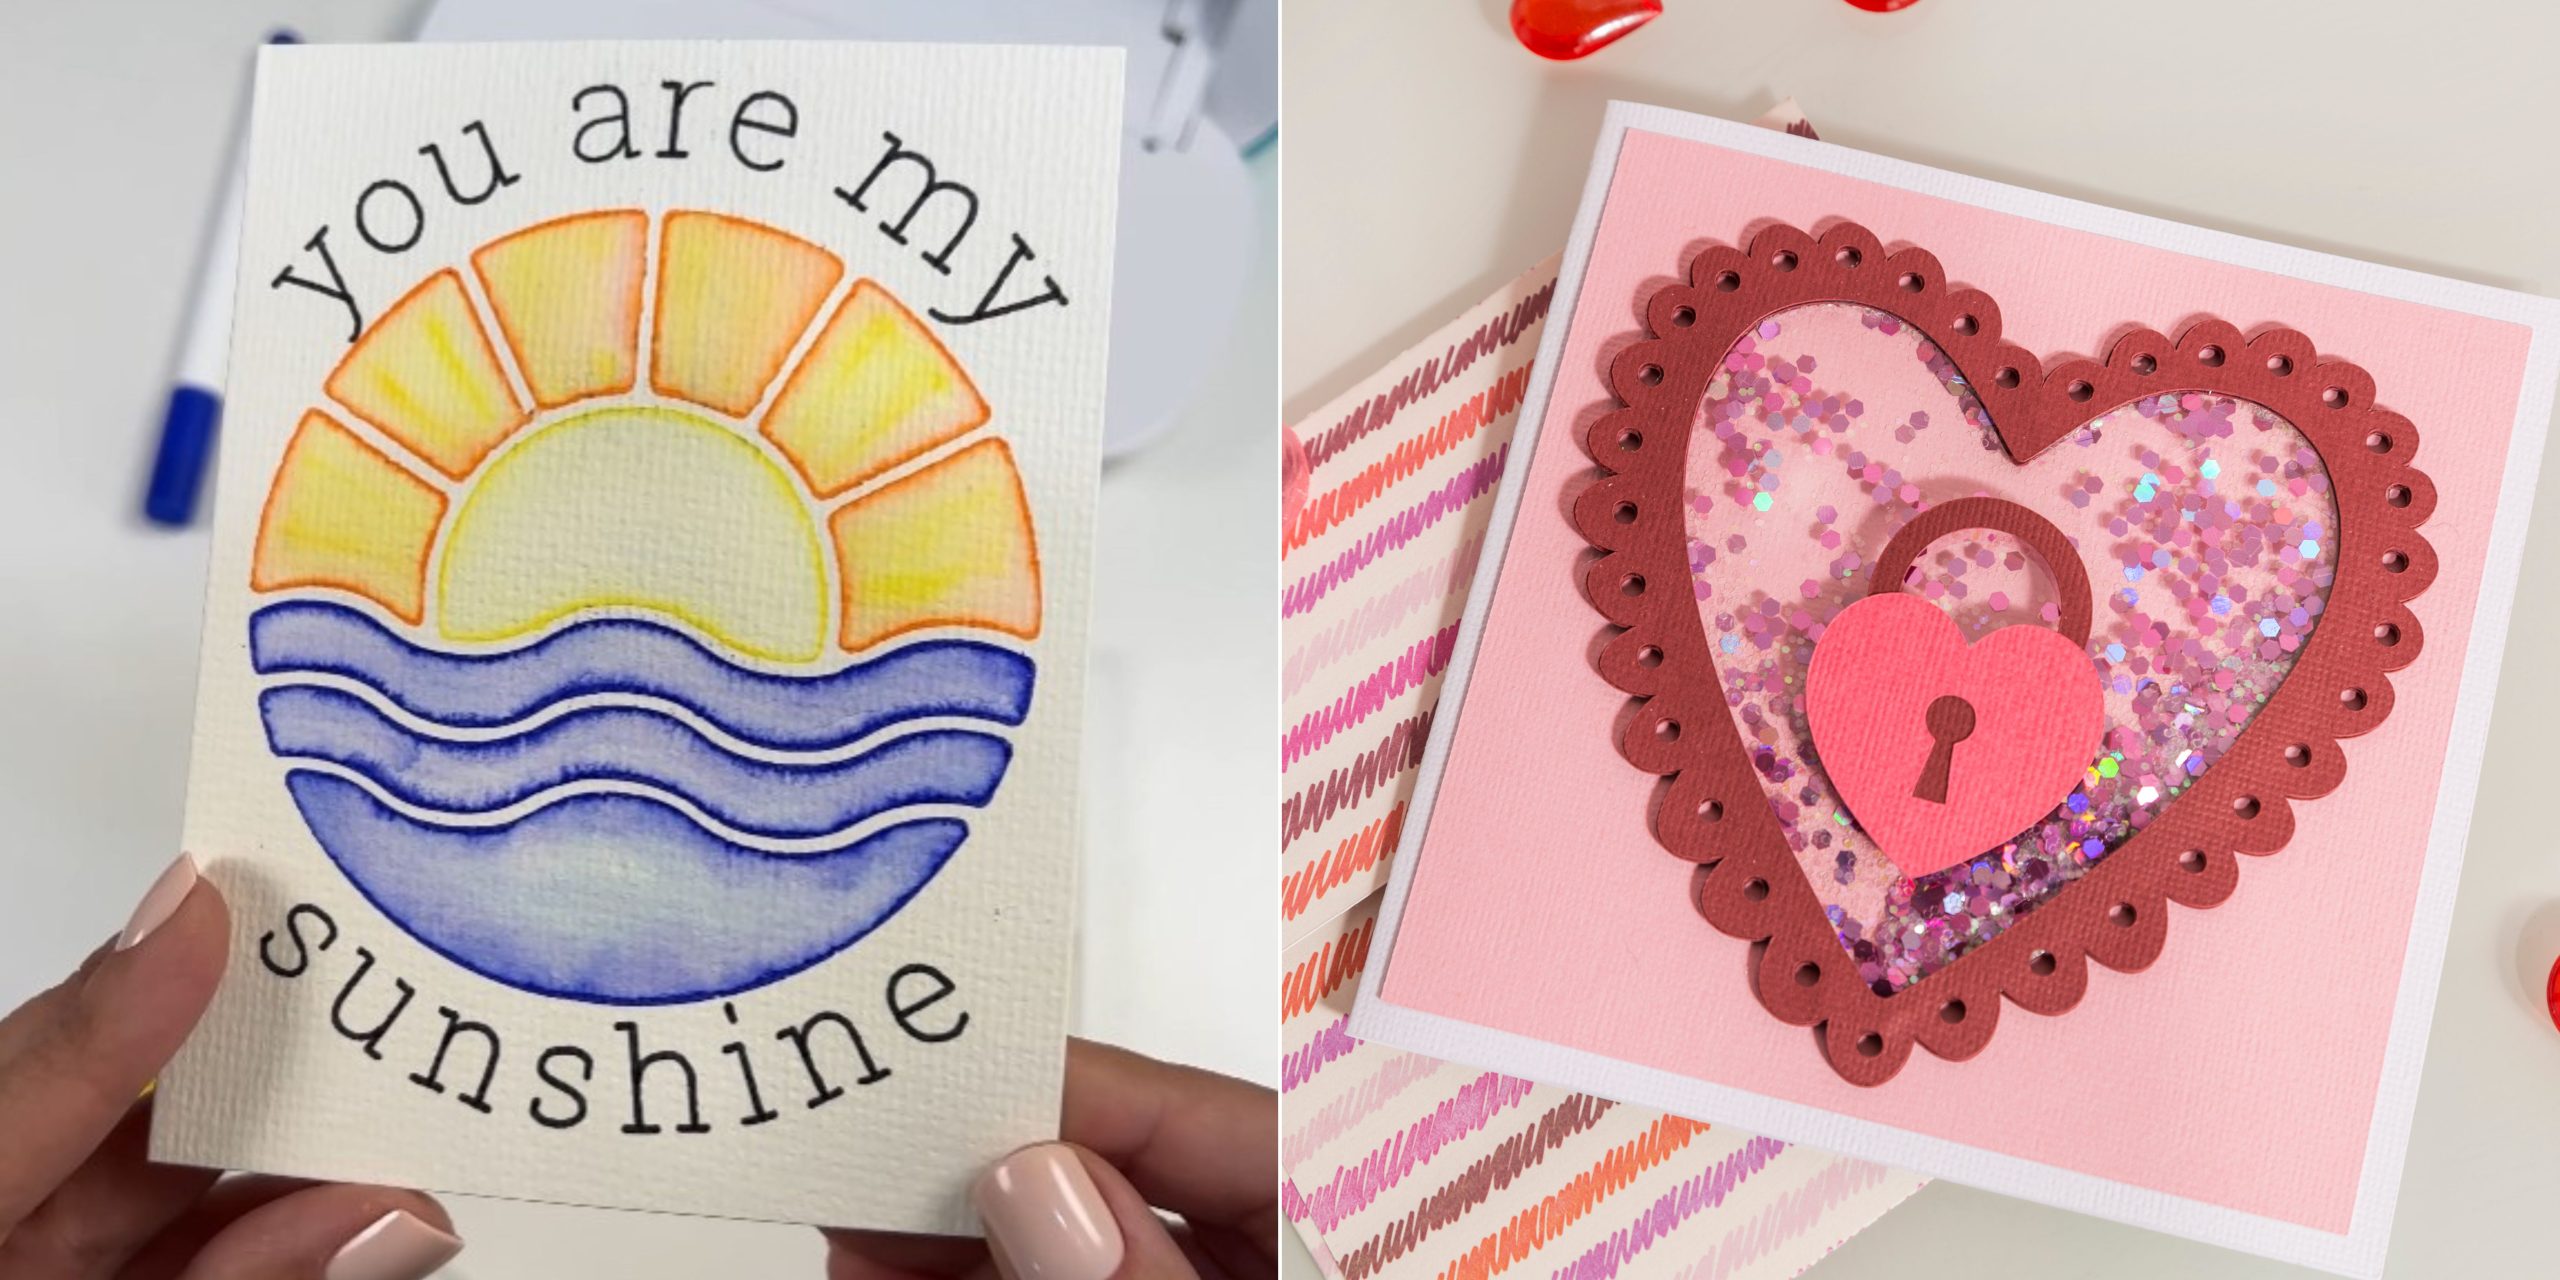 Cardmaking Tips Every Cricut Maker Should Know